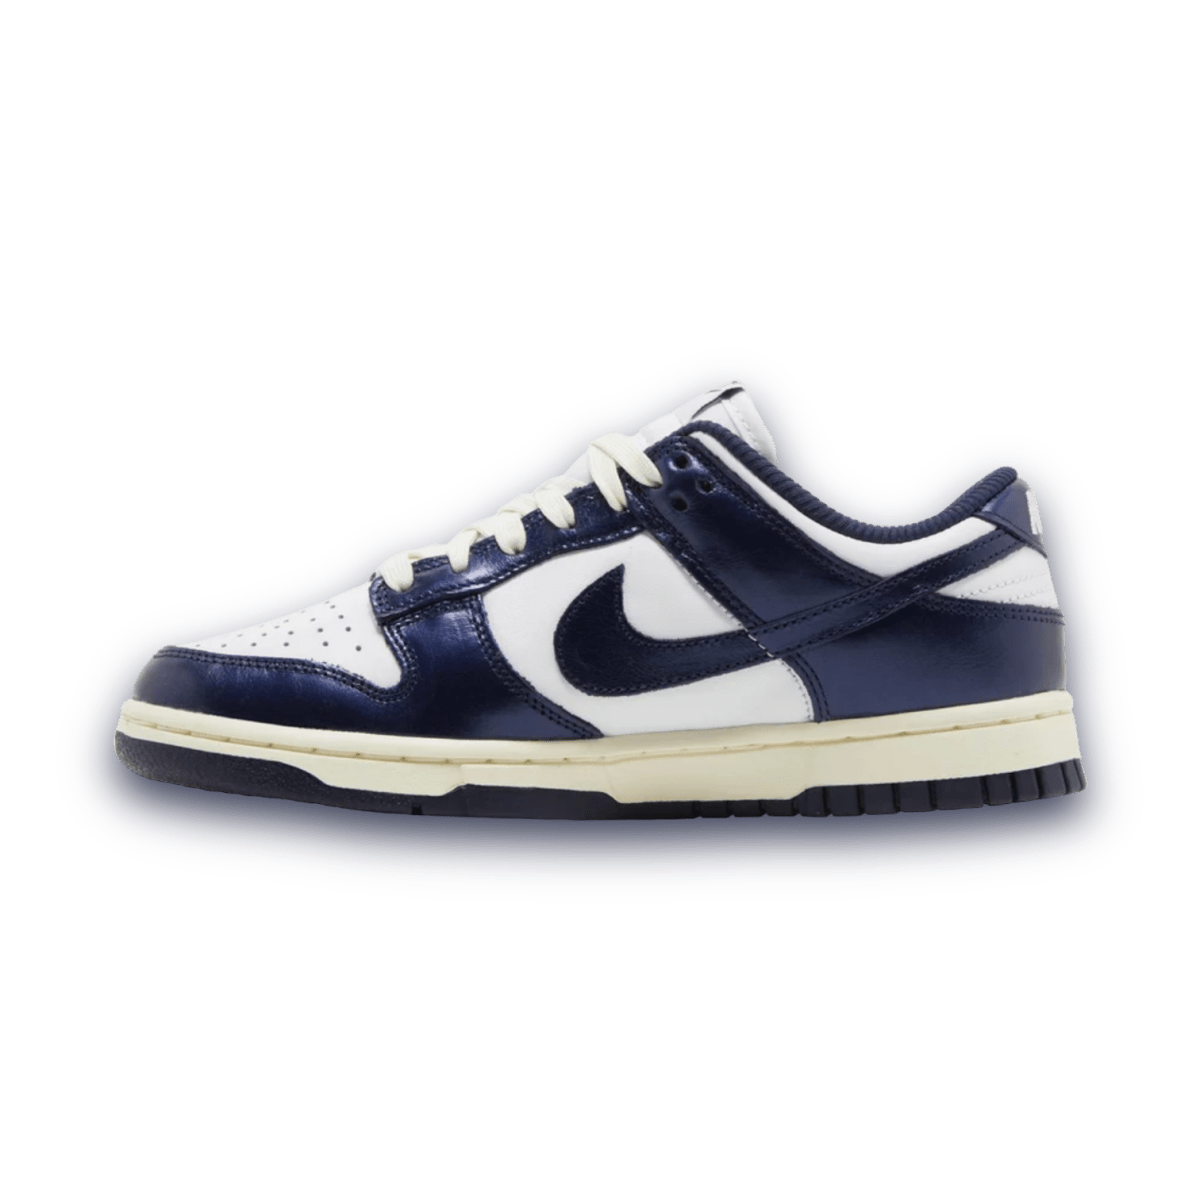 Laces for Lions Dunk Low 'Vintage Navy' - Jawns on Fire Sneakers